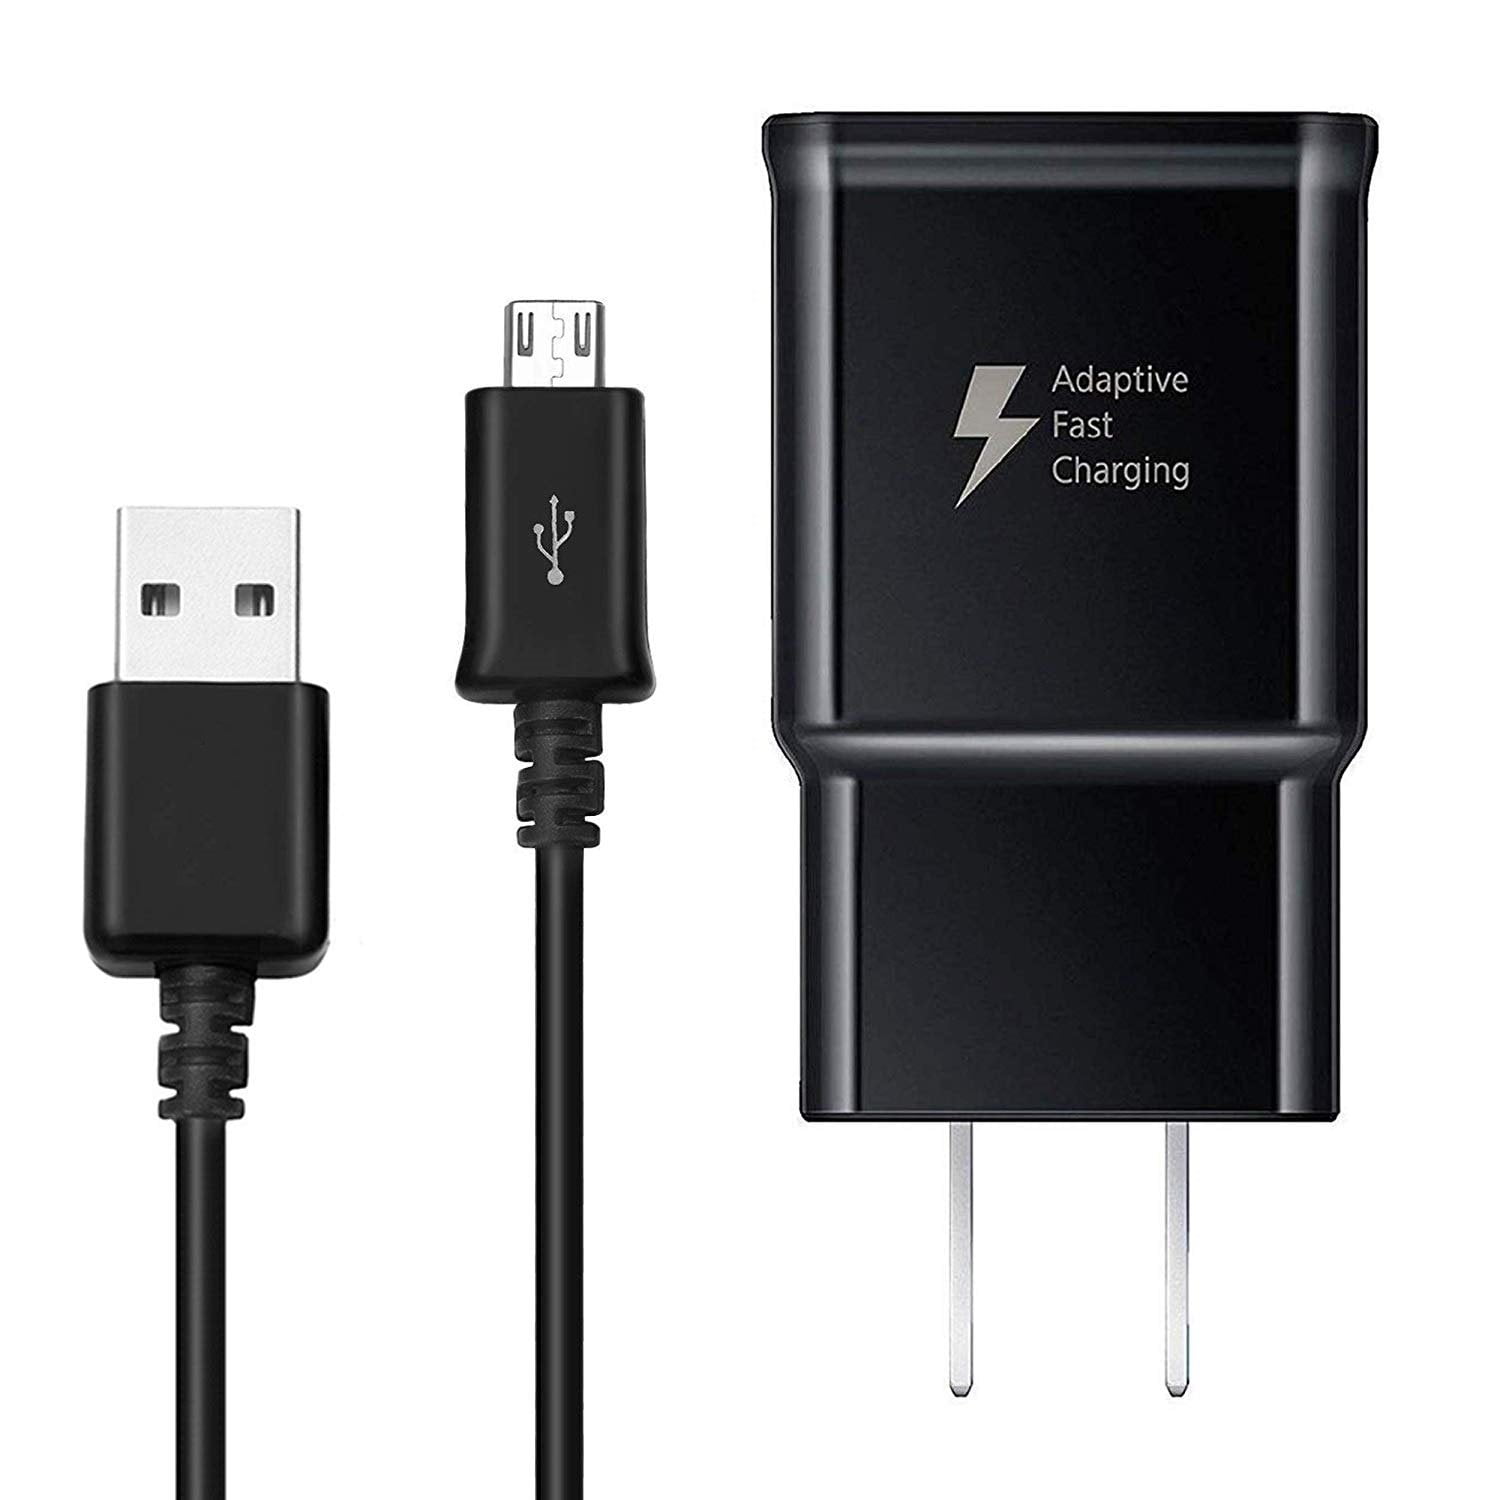 Moto Droid/X Sony Note 5 Verizon Fast Micro USB Car Charger with 2.7 Amp Fast Charger Technology for Samsung Galaxy S7/S6/Edge J7 LG G4 Galaxy HTC & Most Micro USB Devices. 